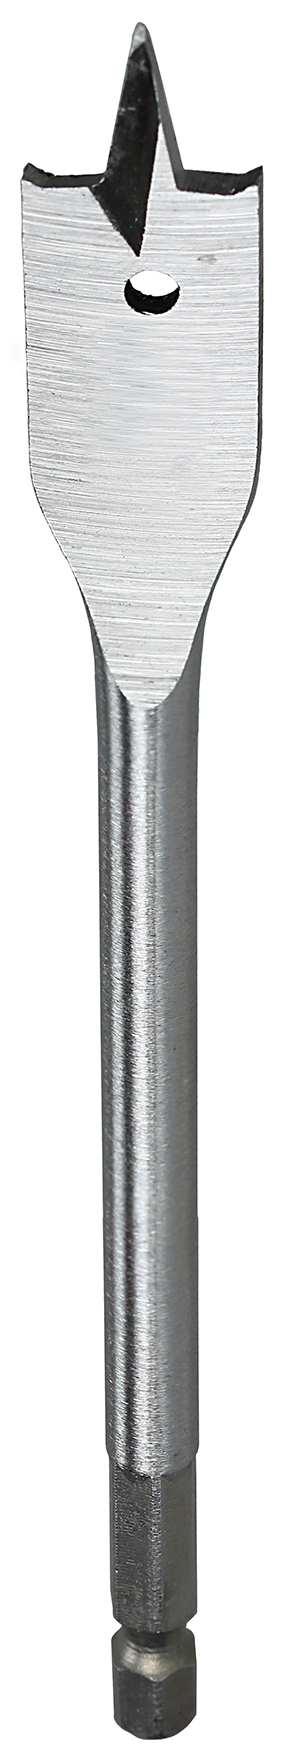 Spade Drill Bit, 7/8 in. Size, Hex shank type, Cold Forged Steel material, 6 in. drilling depth